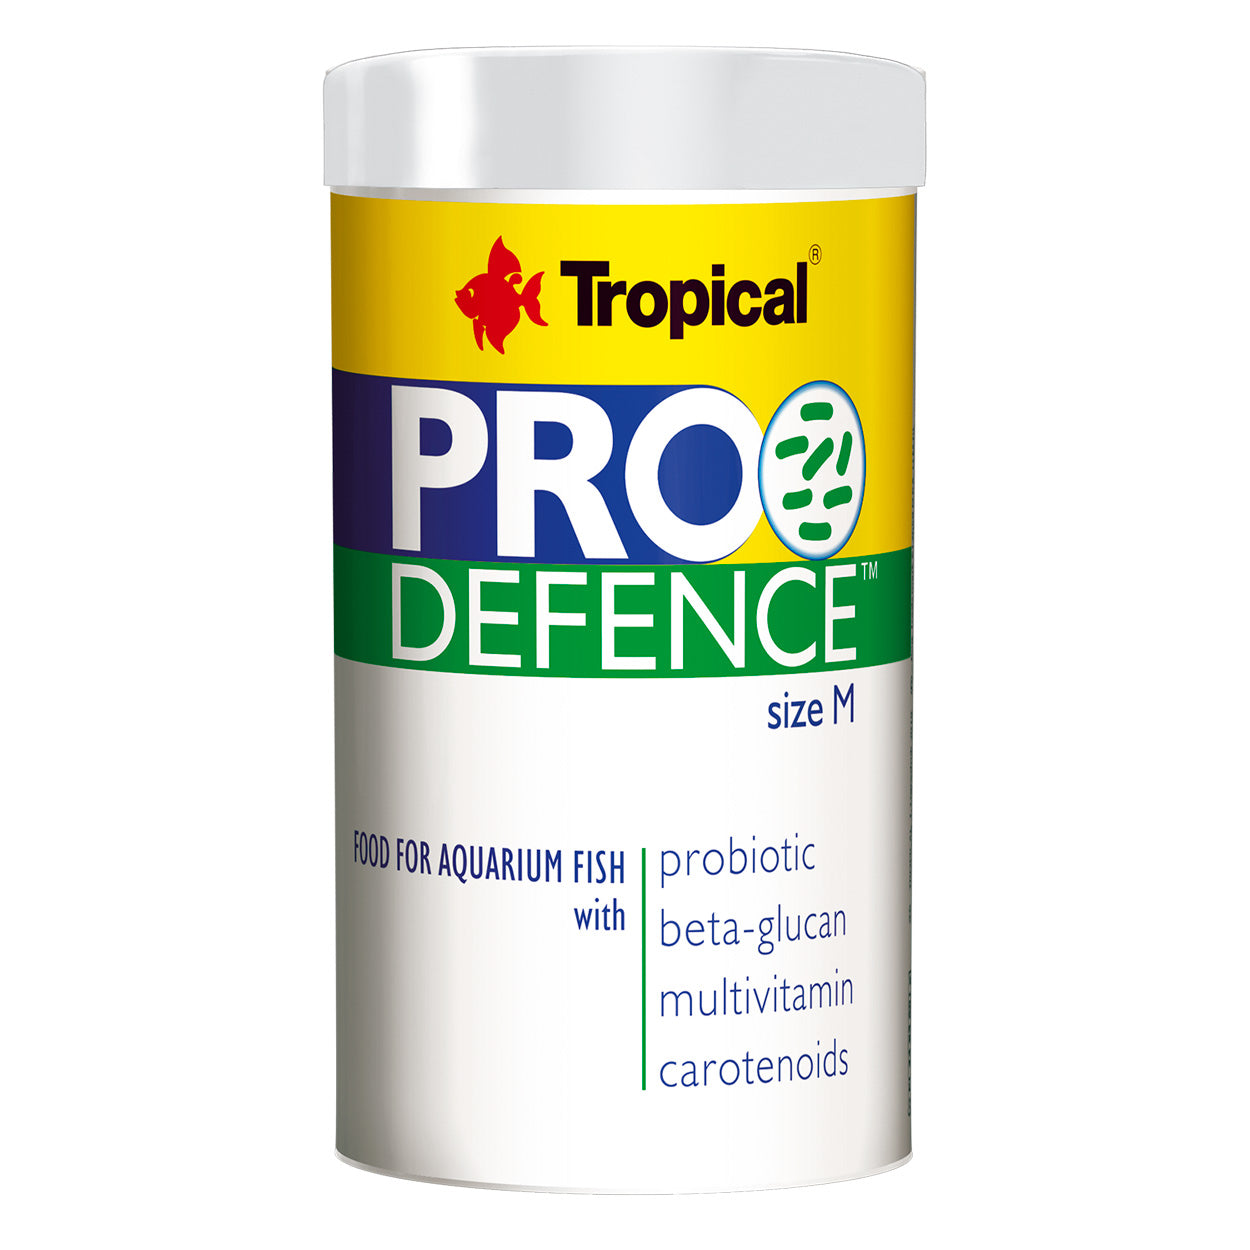 Tropical Pro Defence